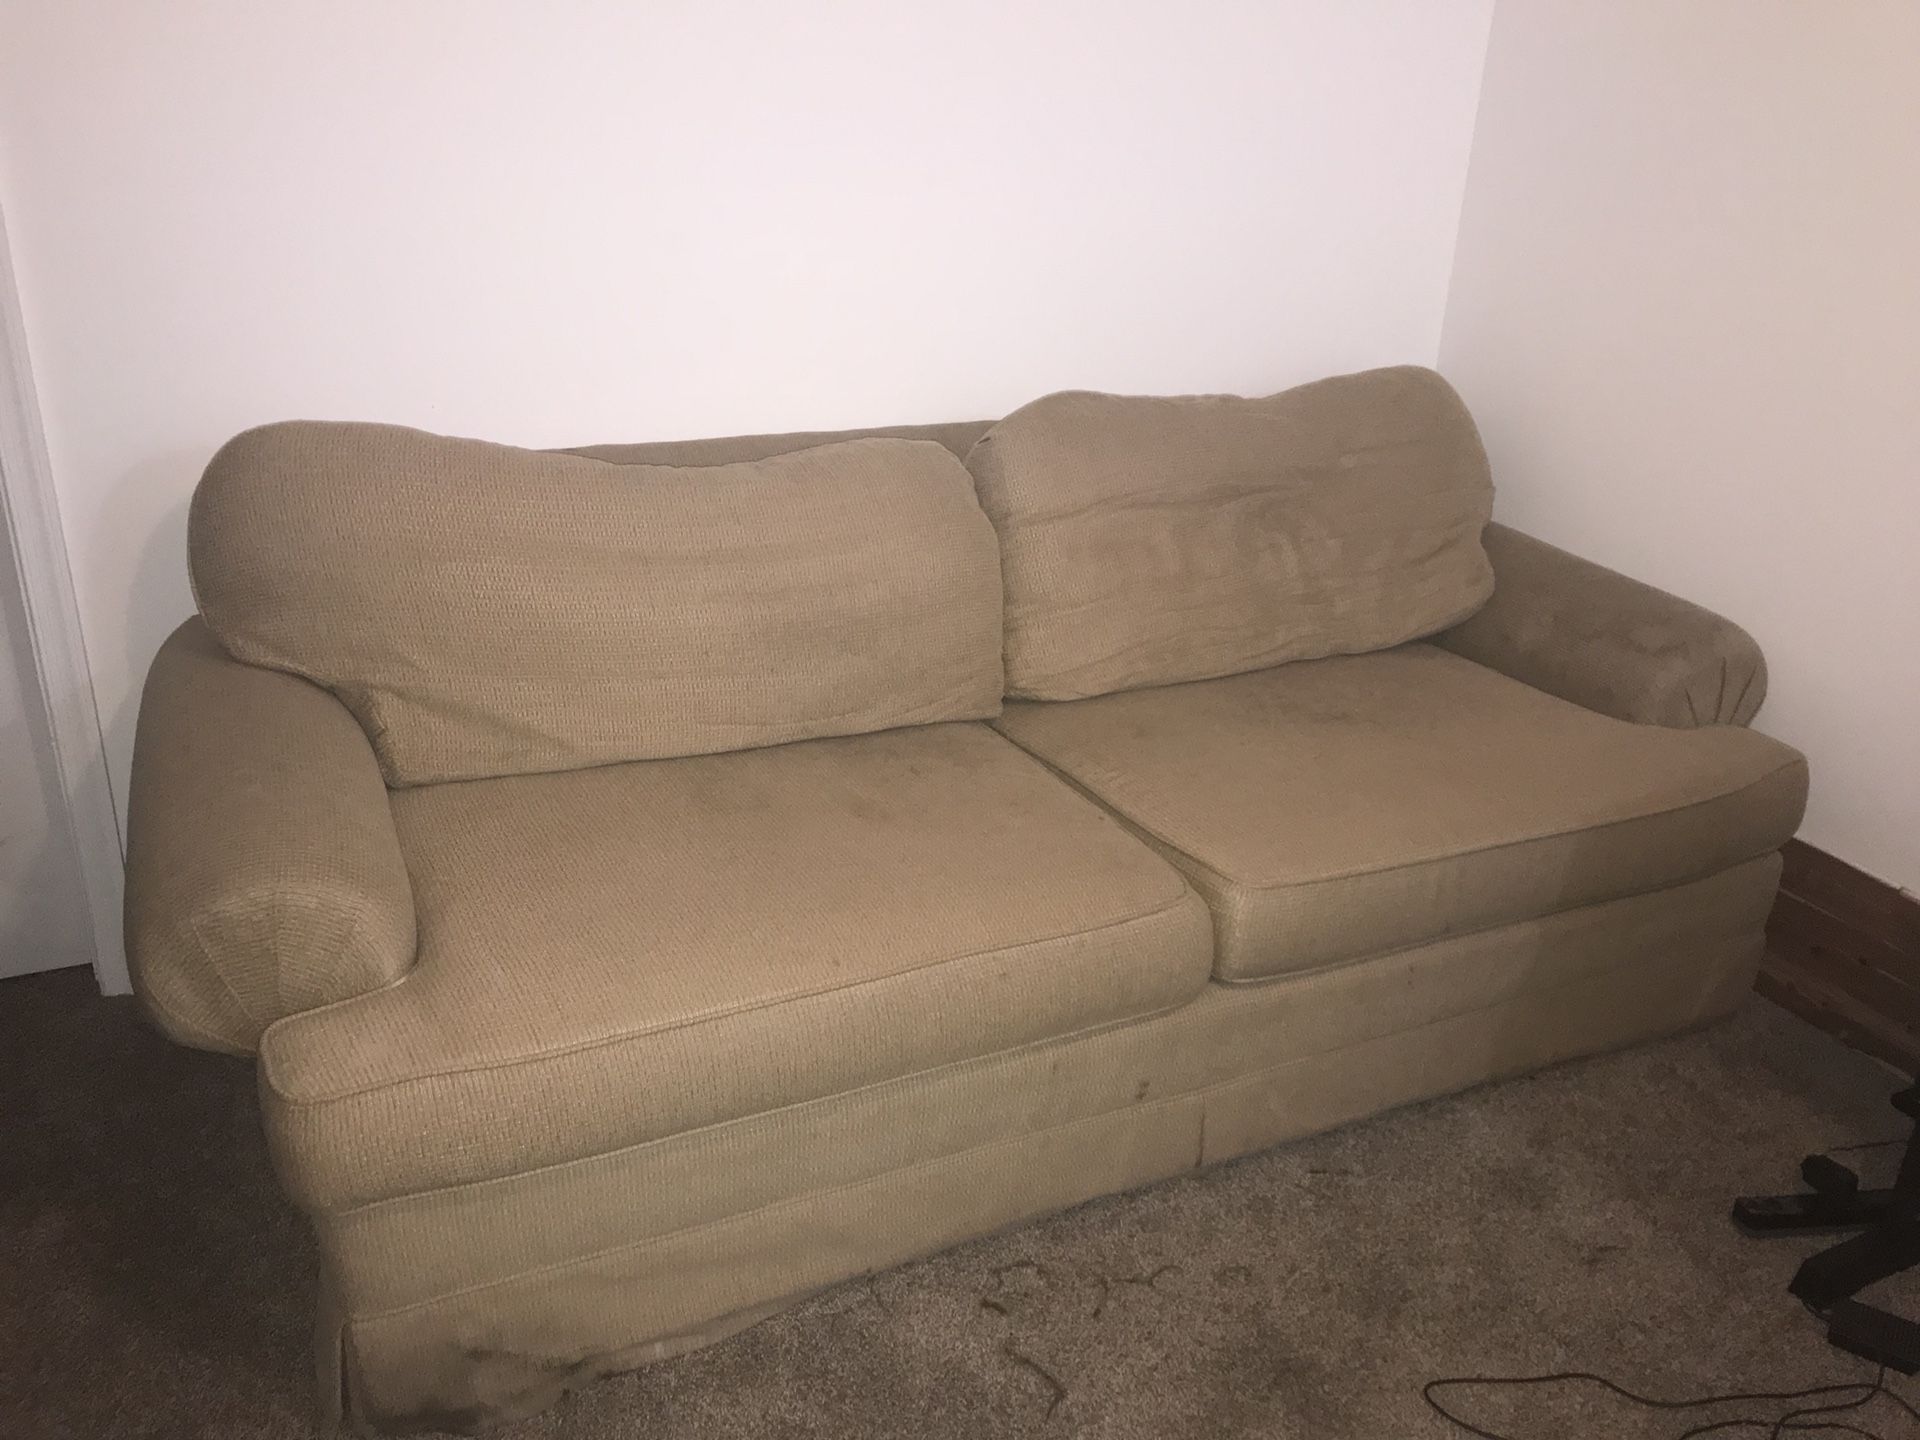 6’ fabric couch